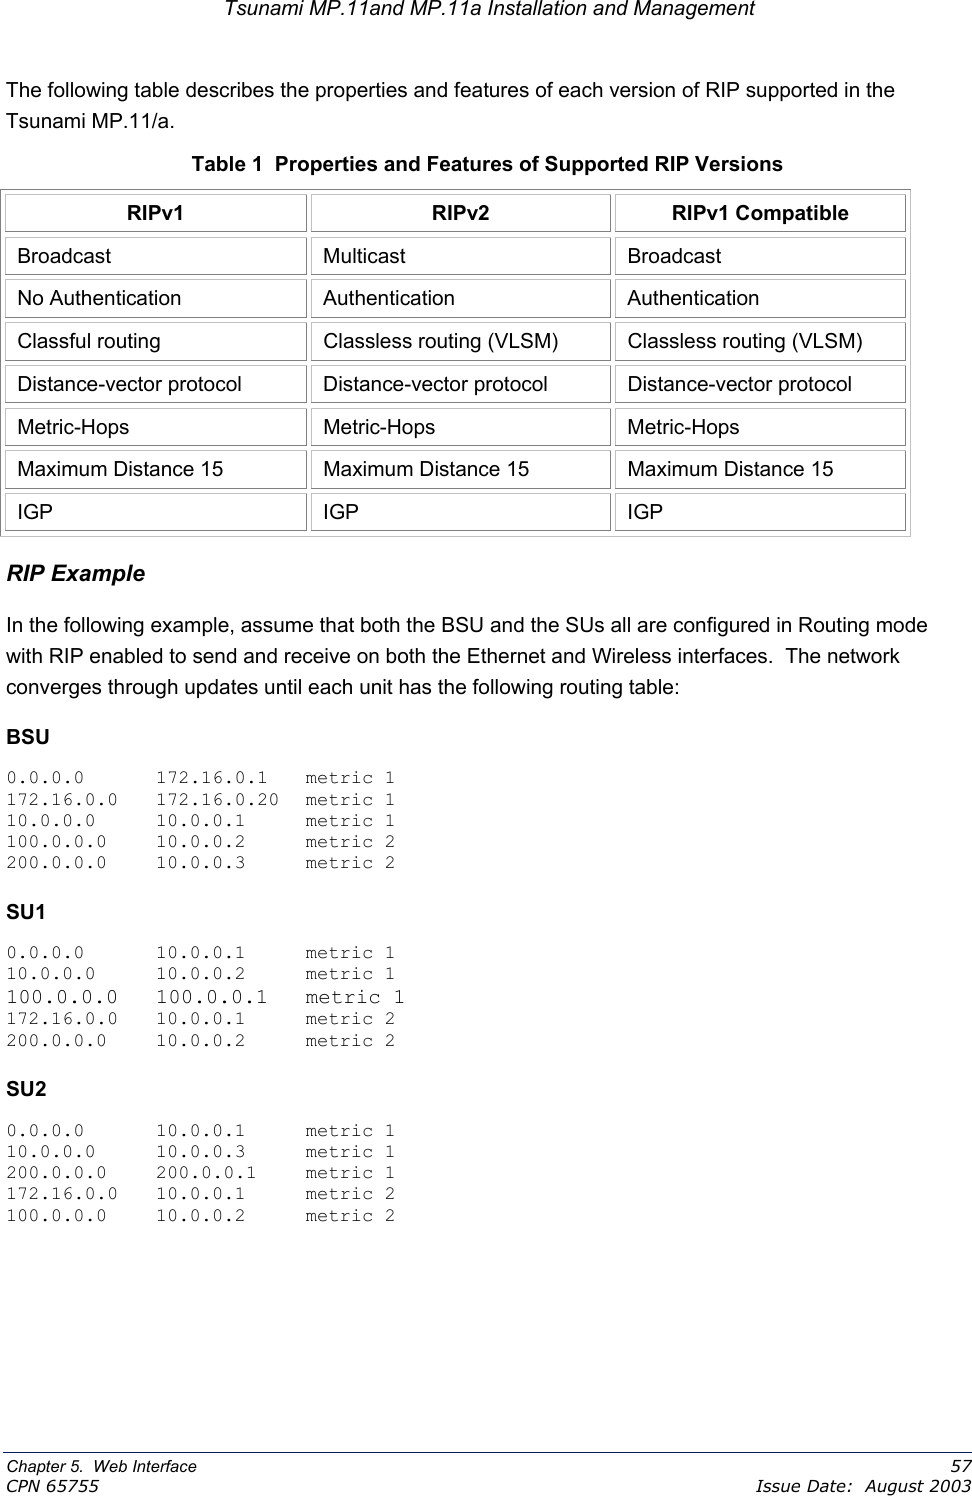 Tsunami MP.11and MP.11a Installation and Management The following table describes the properties and features of each version of RIP supported in the Tsunami MP.11/a. Table 1  Properties and Features of Supported RIP Versions RIPv1 RIPv2 RIPv1 Compatible Broadcast Multicast  Broadcast No Authentication  Authentication Authentication Classful routing  Classless routing (VLSM)  Classless routing (VLSM) Distance-vector protocol  Distance-vector protocol  Distance-vector protocol Metric-Hops Metric-Hops Metric-Hops Maximum Distance 15  Maximum Distance 15  Maximum Distance 15 IGP IGP IGP RIP Example In the following example, assume that both the BSU and the SUs all are configured in Routing mode with RIP enabled to send and receive on both the Ethernet and Wireless interfaces.  The network converges through updates until each unit has the following routing table: BSU 0.0.0.0 172.16.0.1 metric 1 172.16.0.0 172.16.0.20 metric 1 10.0.0.0 10.0.0.1 metric 1 100.0.0.0 10.0.0.2  metric 2 200.0.0.0 10.0.0.3  metric 2 SU1 0.0.0.0 10.0.0.1 metric 1 10.0.0.0 10.0.0.2 metric 1 100.0.0.0 100.0.0.1 metric 1 172.16.0.0 10.0.0.1  metric 2 200.0.0.0 10.0.0.2  metric 2 SU2 0.0.0.0 10.0.0.1 metric 1 10.0.0.0 10.0.0.3 metric 1 200.0.0.0 200.0.0.1 metric 1 172.16.0.0 10.0.0.1  metric 2 100.0.0.0 10.0.0.2  metric 2  Chapter 5.  Web Interface    57 CPN 65755    Issue Date:  August 2003 